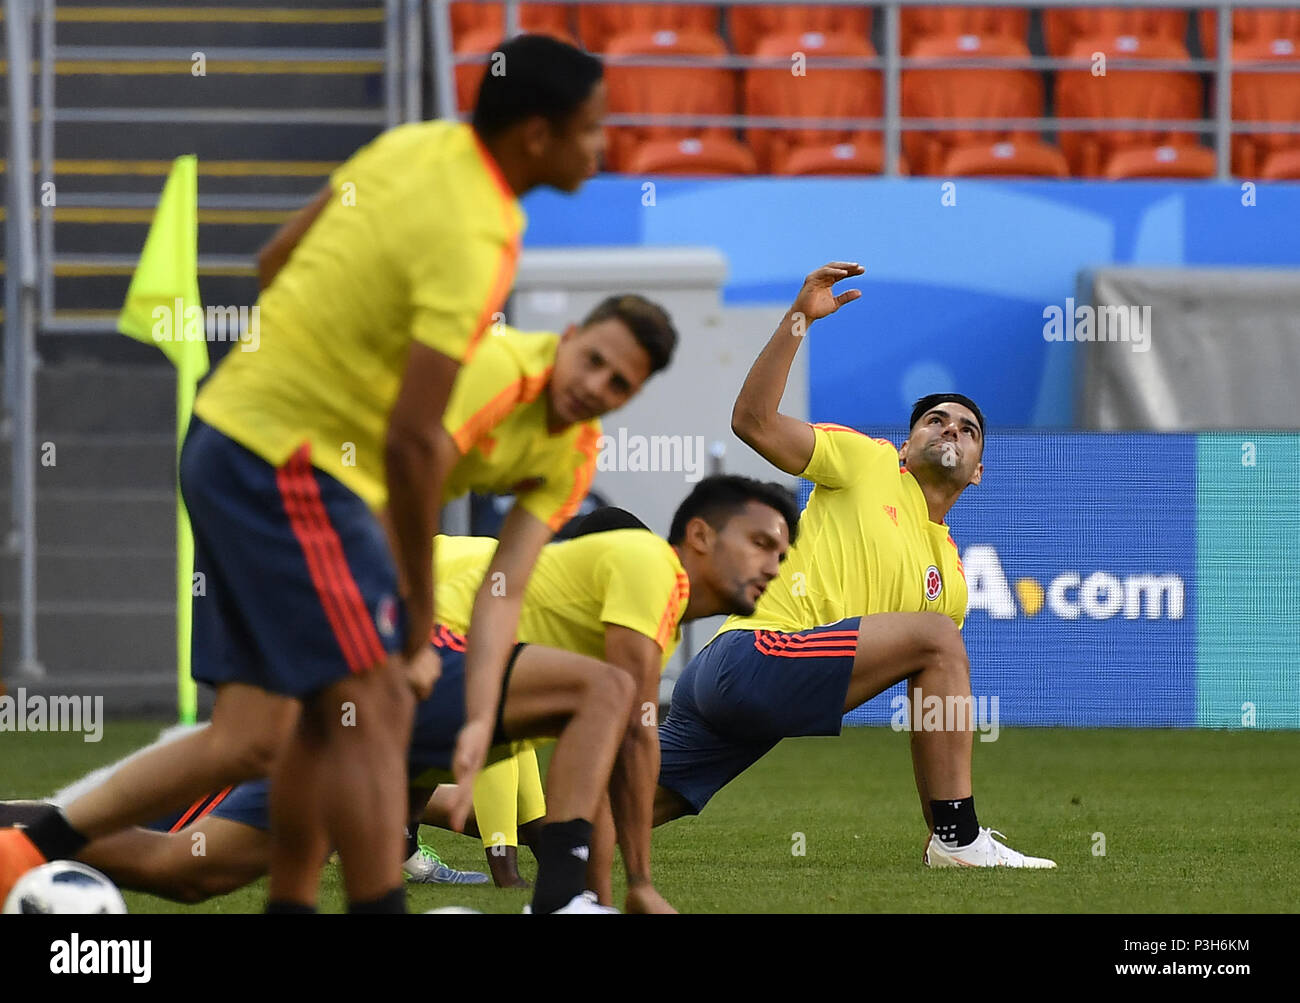 (180618) -- SARANSK, June 18, 2018(Xinhua) -- Colombia's Radamel Falcao (1st R) attends a training session prior to a group H match against Japan at the 2018 FIFA World Cup in Saransk, Russia, on June 18, 2018. (Xinhua/He Canling) Stock Photo